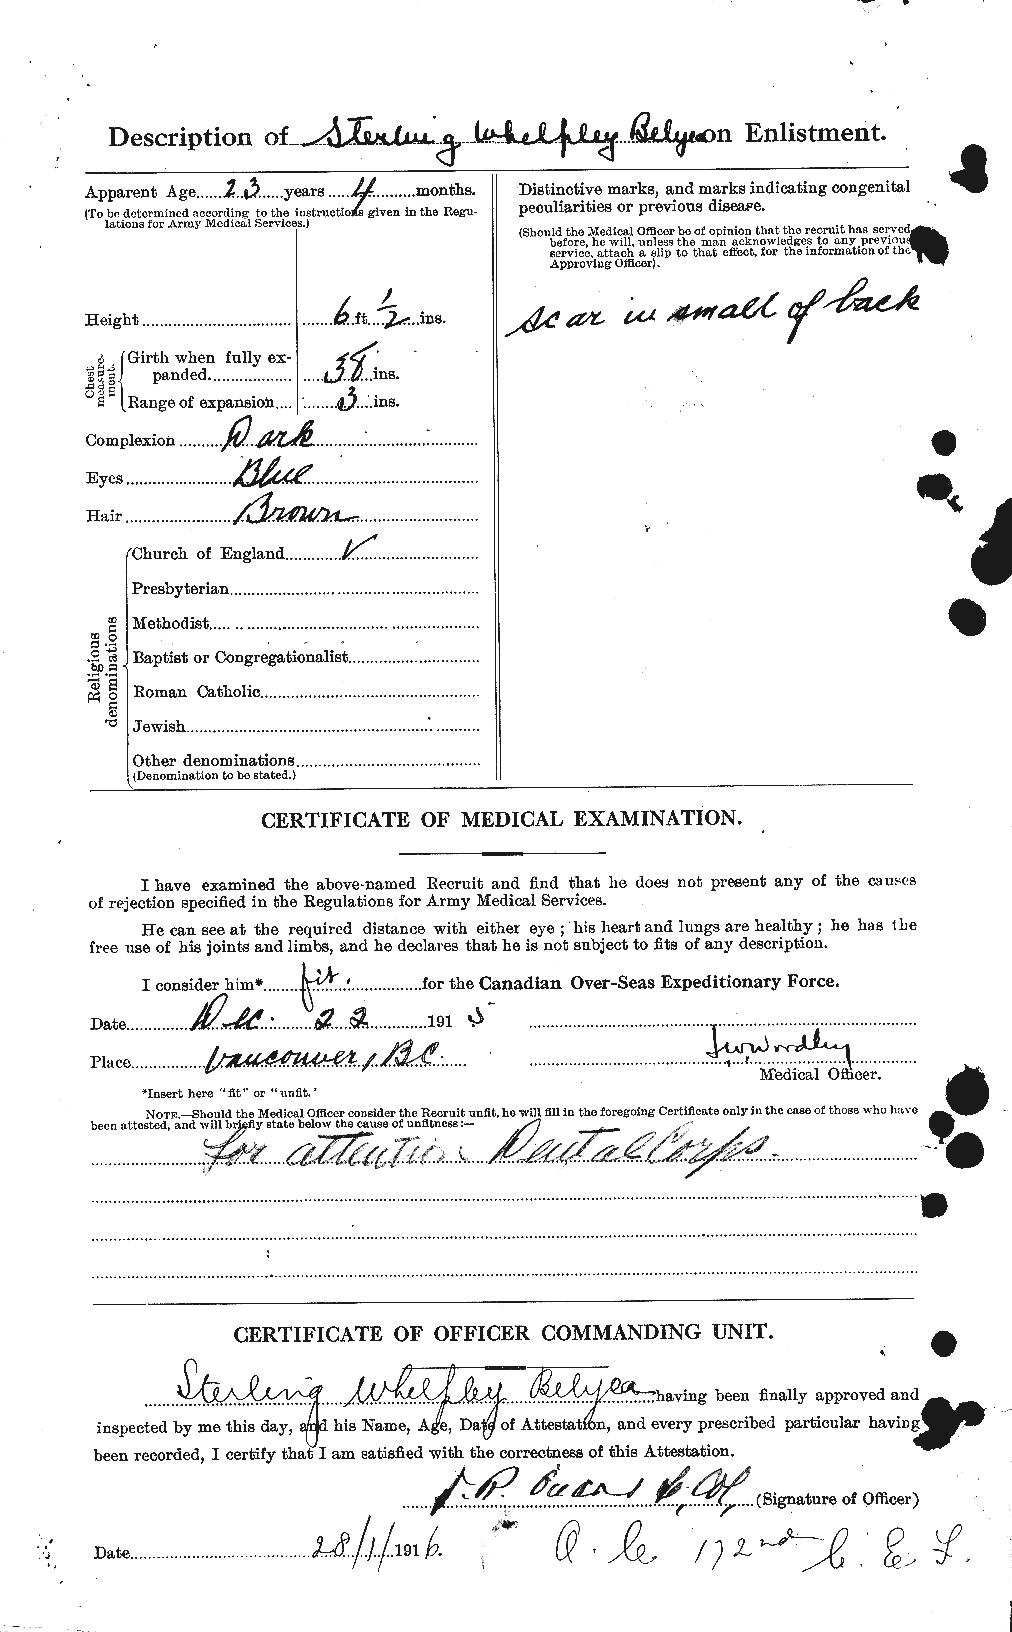 Personnel Records of the First World War - CEF 233710b